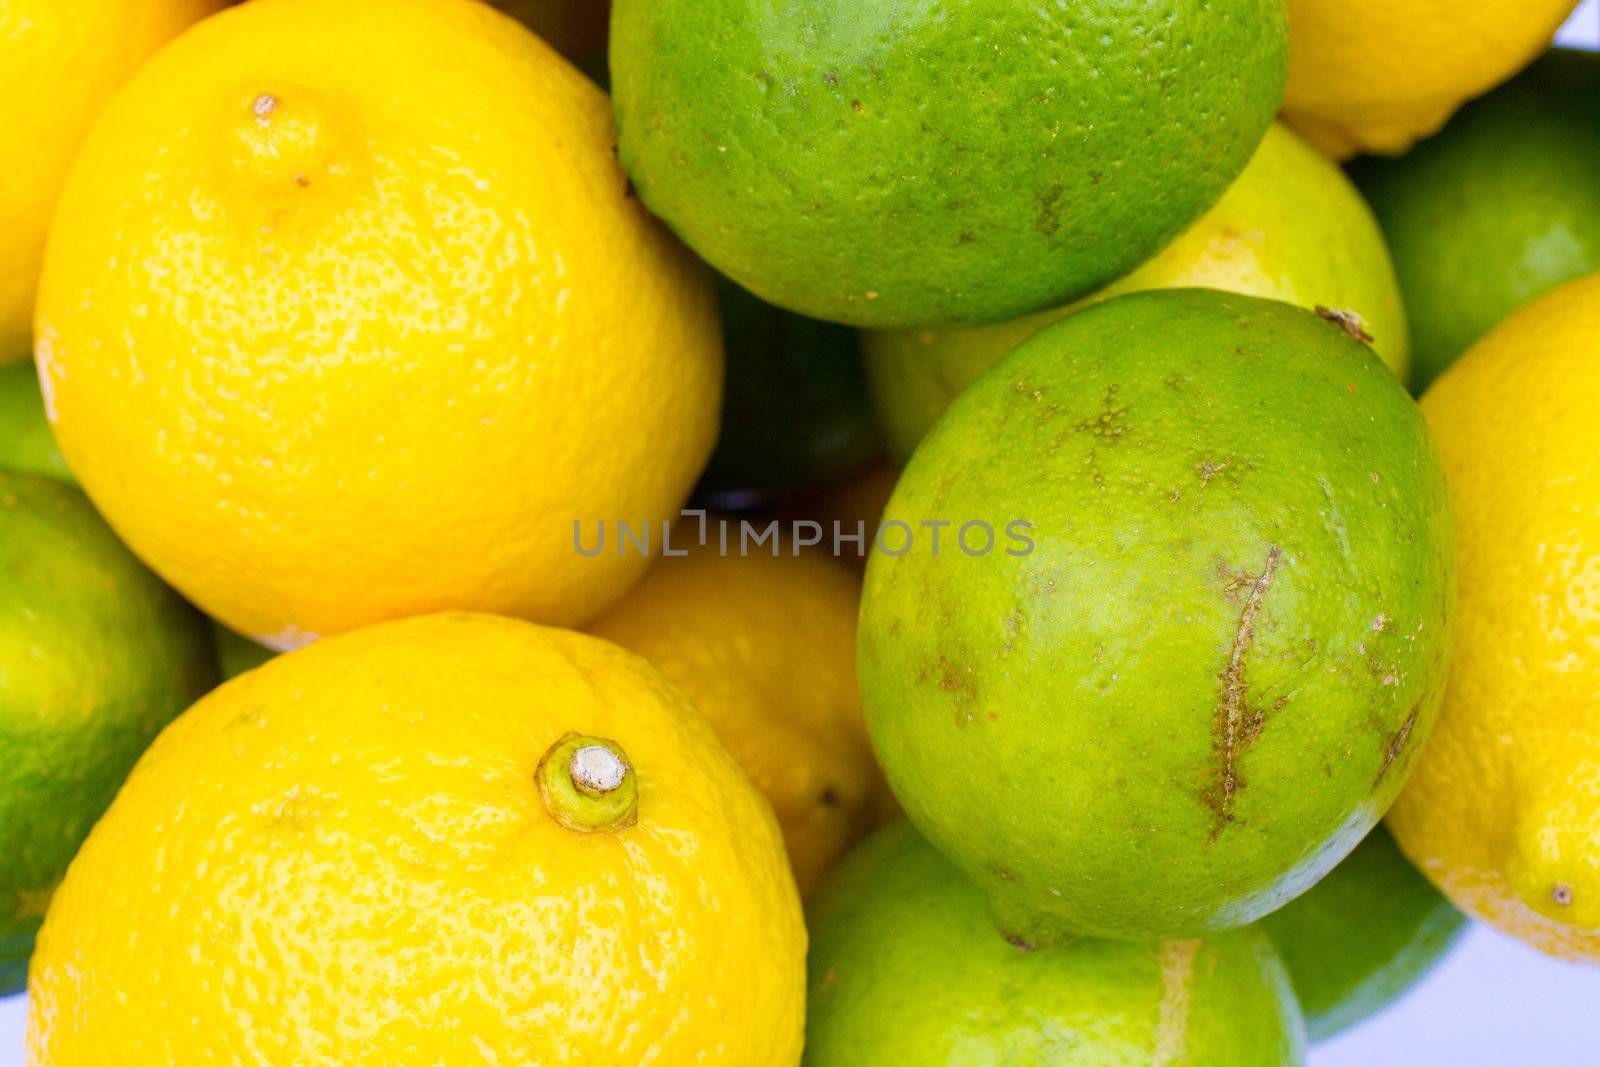 Yellow lemons sit together with green limes as fruit decor centerpieces at a wedding.